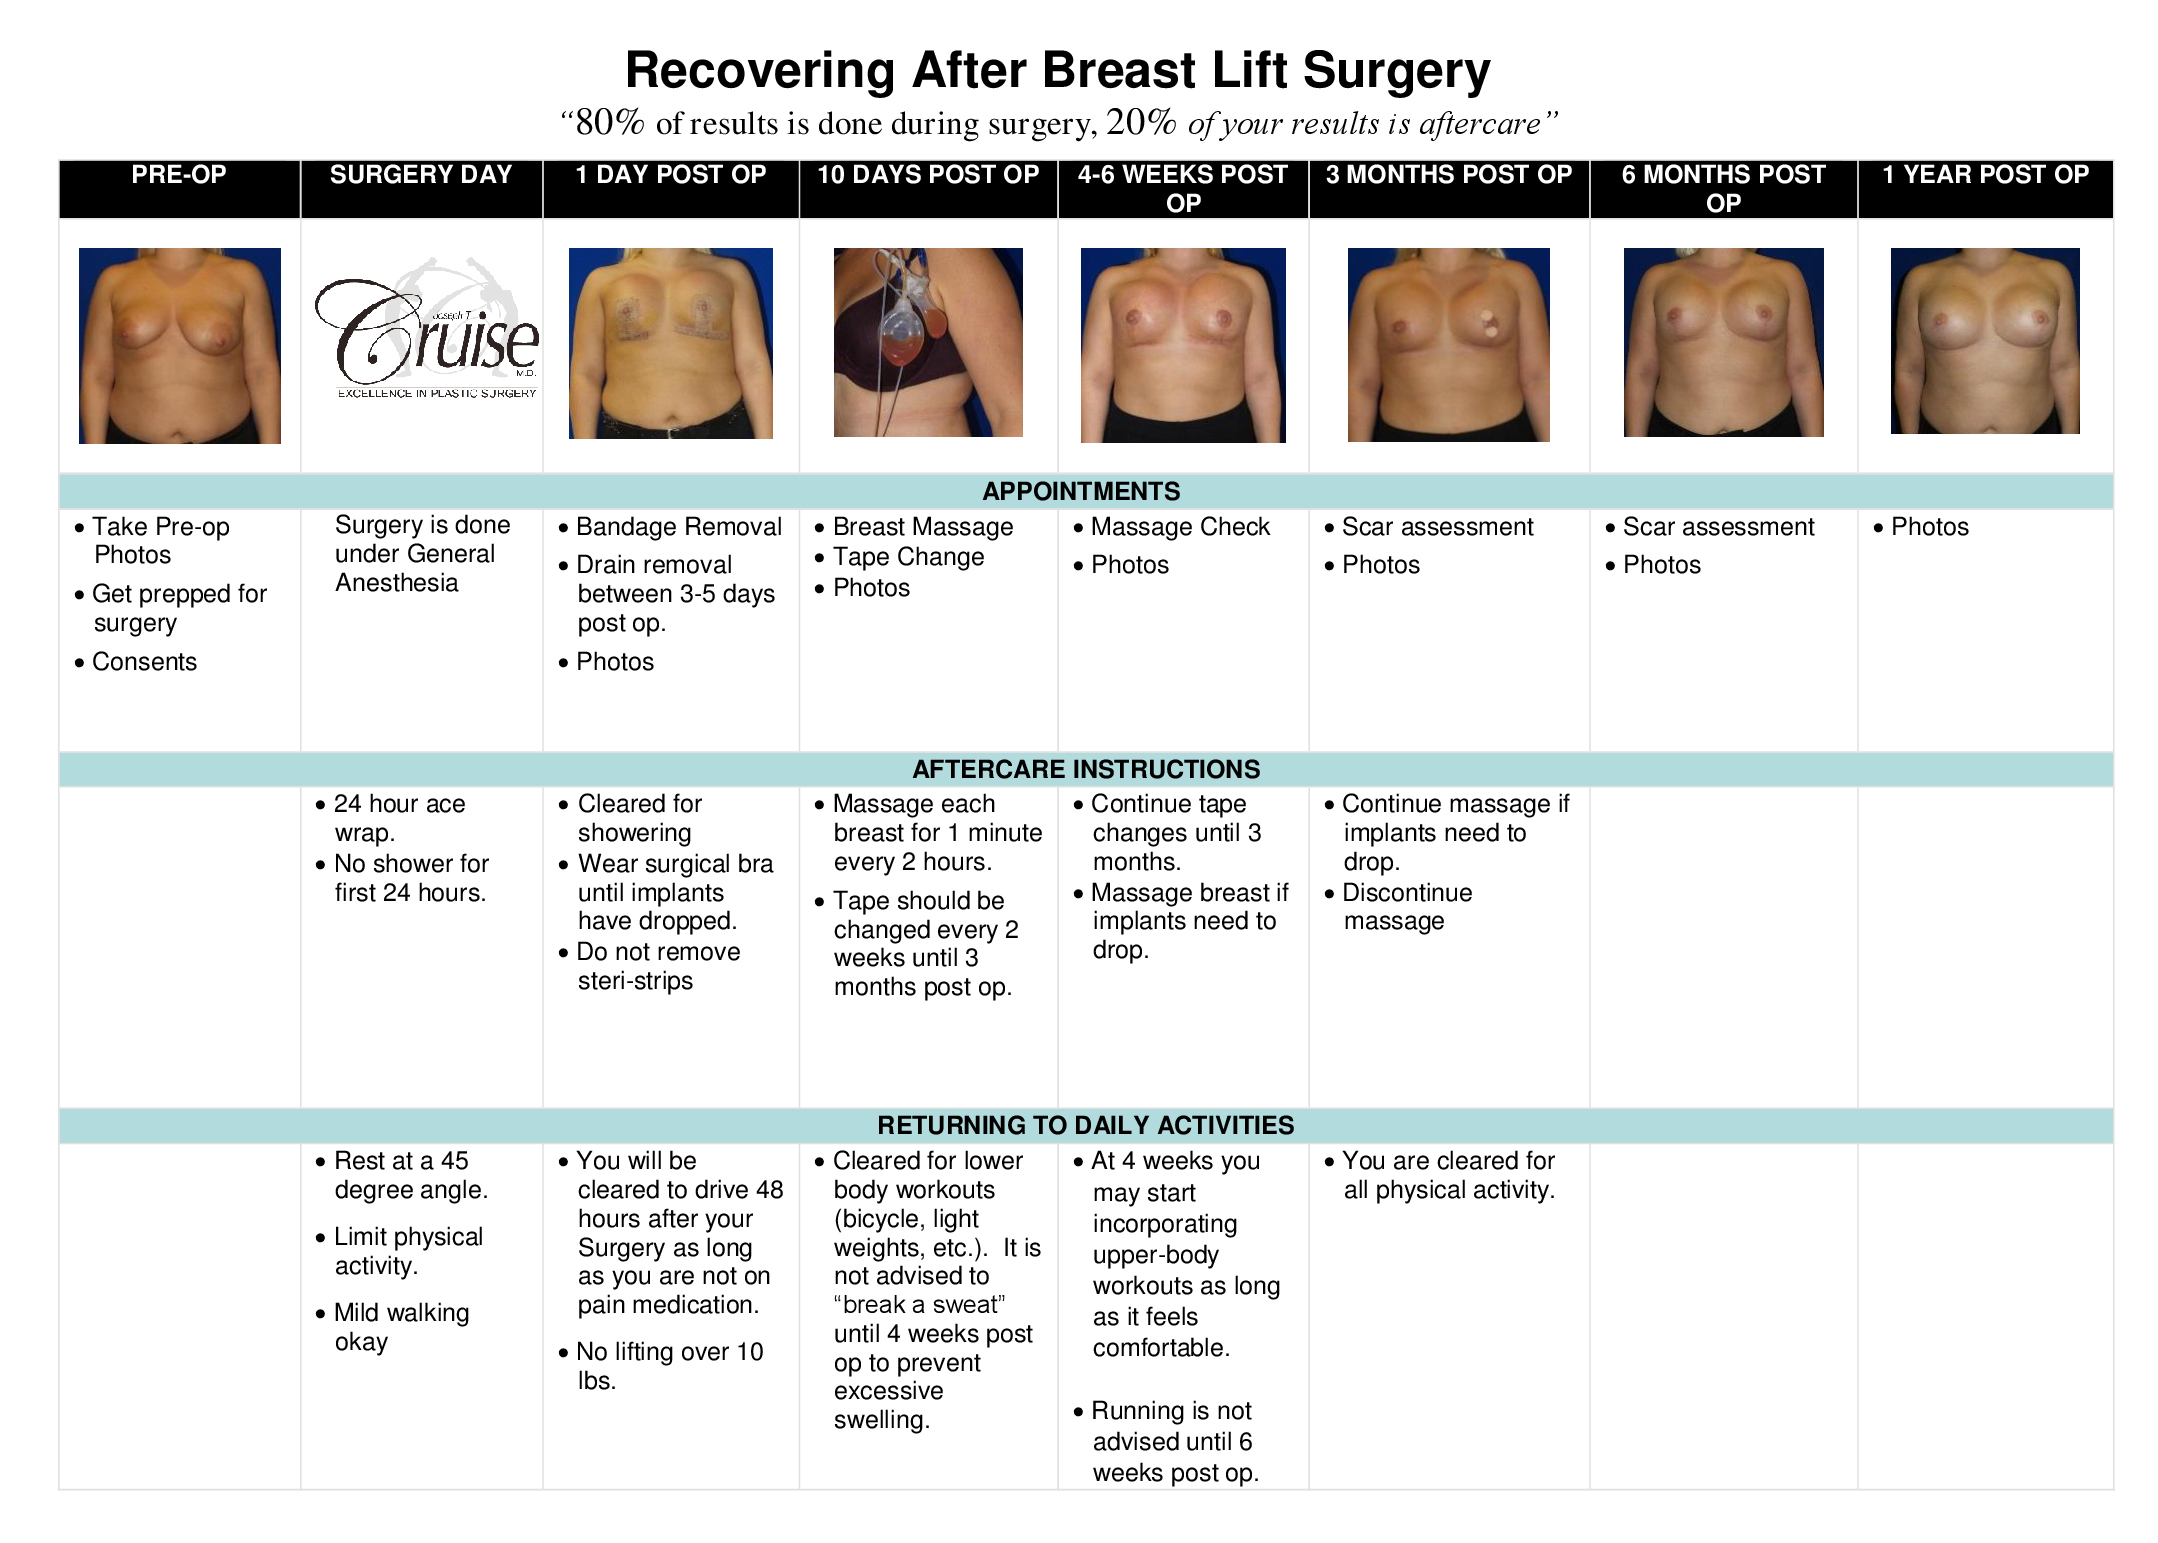 Breast Lift Orange County  After Surgery Instructions - Newport Beach -  Cruise Plastic Surgery